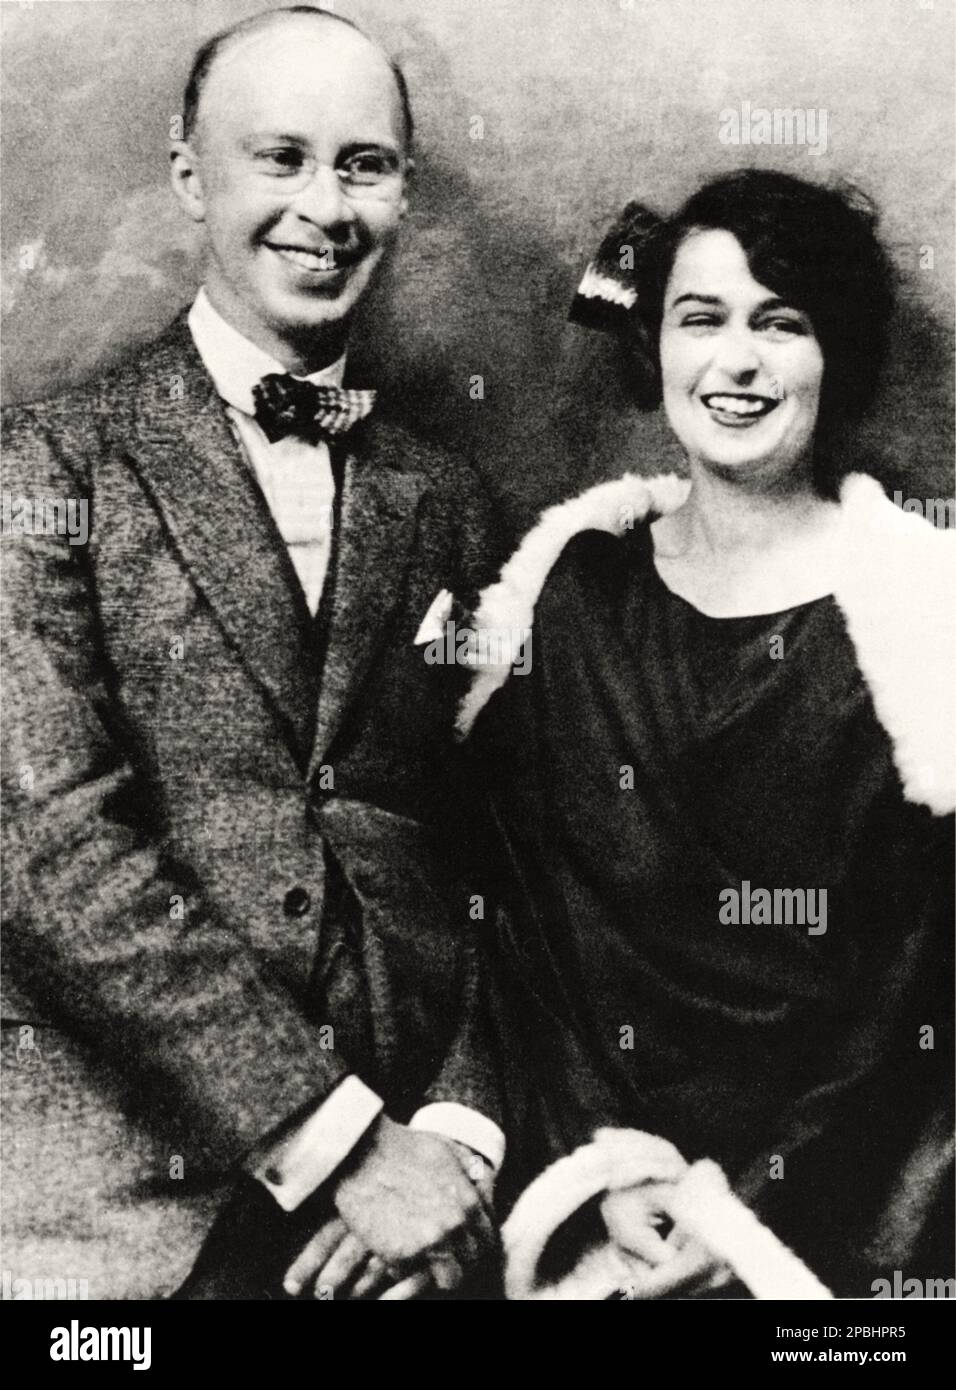 1925 ca, Paris , France : The russian music composer SERGEJ PROKOFIEV ( Sergej Sergeevic Prokof'ev,  1891 - 1953 ) with wife LINA LLUBERA  , was a Russian composer who mastered numerous musical genres and came to be admired as one of the greatest composers of the 20th century - Sergej Sergejevic  Prokofjev , Sergei , Sergey or Serge  and Prokofief  Prokof'ev  Prokofiev  Prokoviev Prokofieff - BALLETS RUSSES by DIAGHILEV - Diagilev - COMPOSITORE - OPERA LIRICA - CLASSICA - CLASSICAL - PORTRAIT - RITRATTO - MUSICISTA - MUSICA  - pianist - pianista - AVANGUARDIA - AVANTGARDE - marito e moglie - s Stock Photo